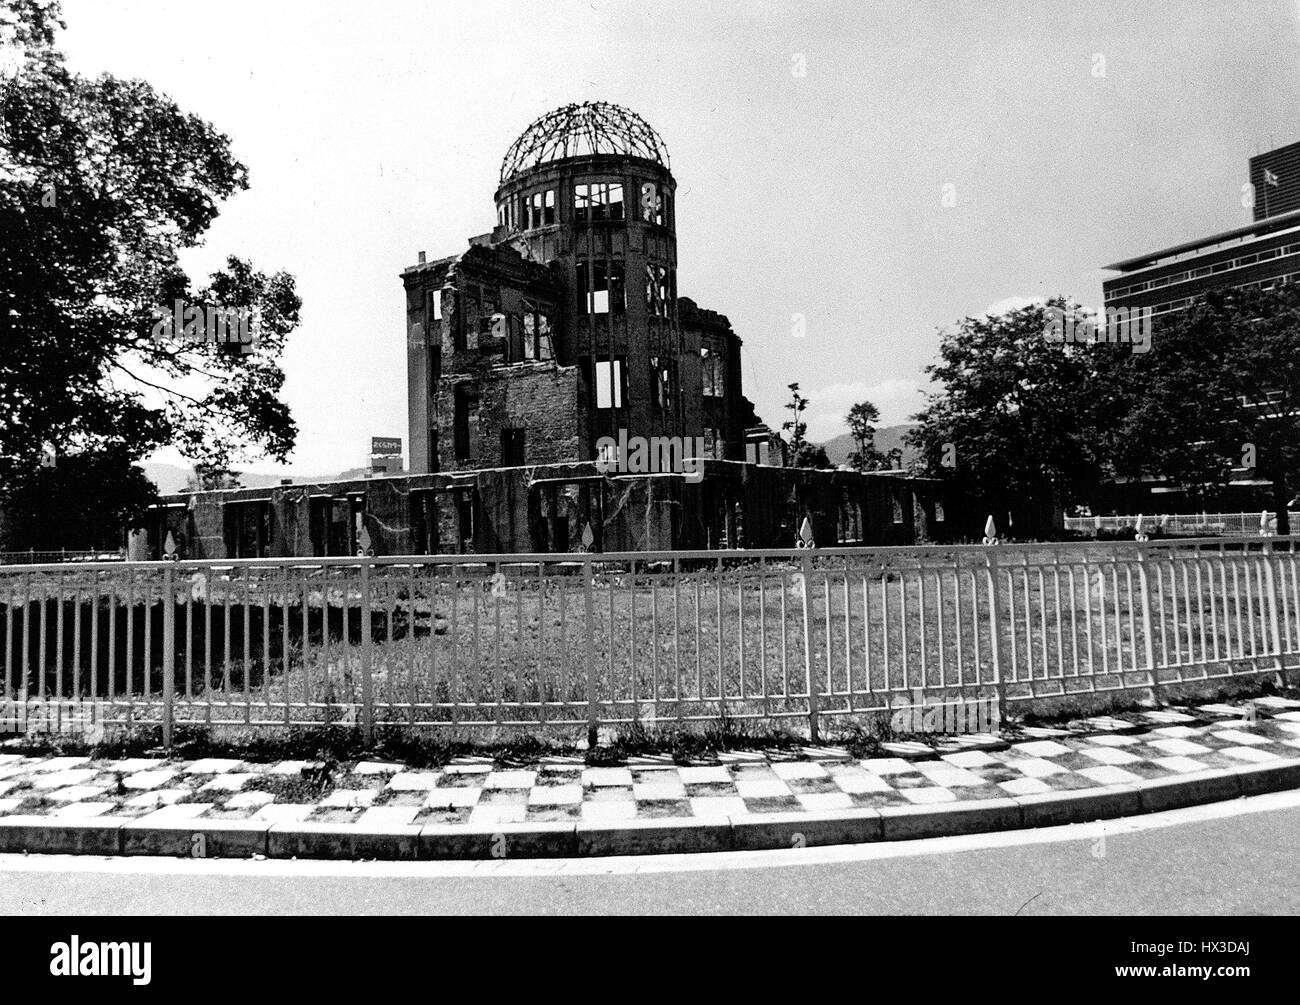 The Peace Dome in Hiroshima, Japan following the atomic bombing, 1945. Image courtesy US Department of Energy. Stock Photo